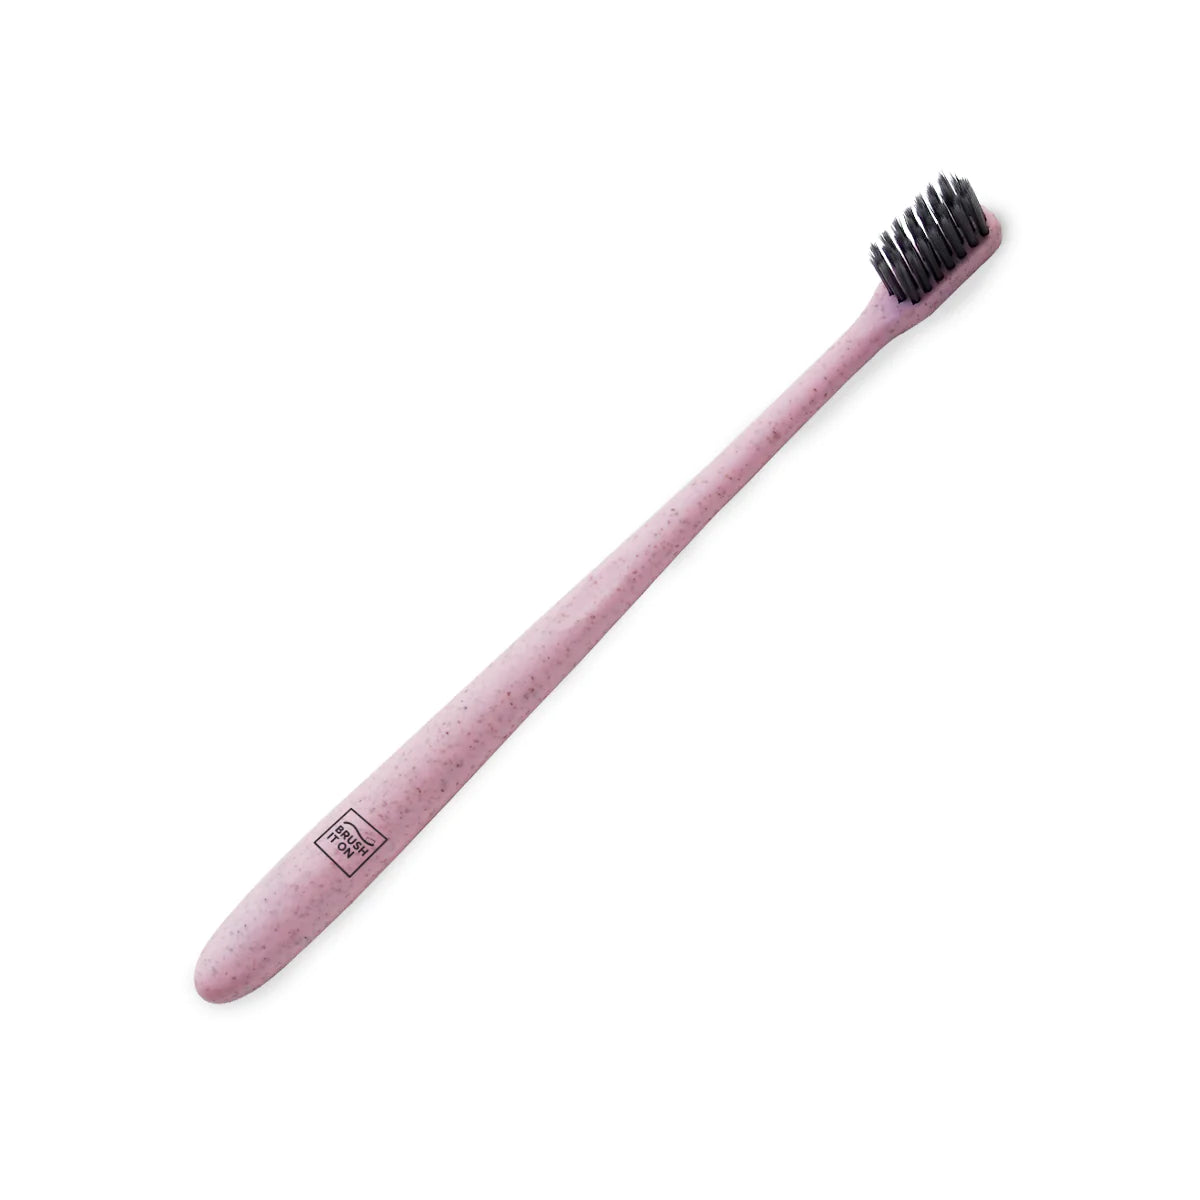 Brush It On Wheat Straw Toothbrush, Soft Bristles & Charcoal Infused